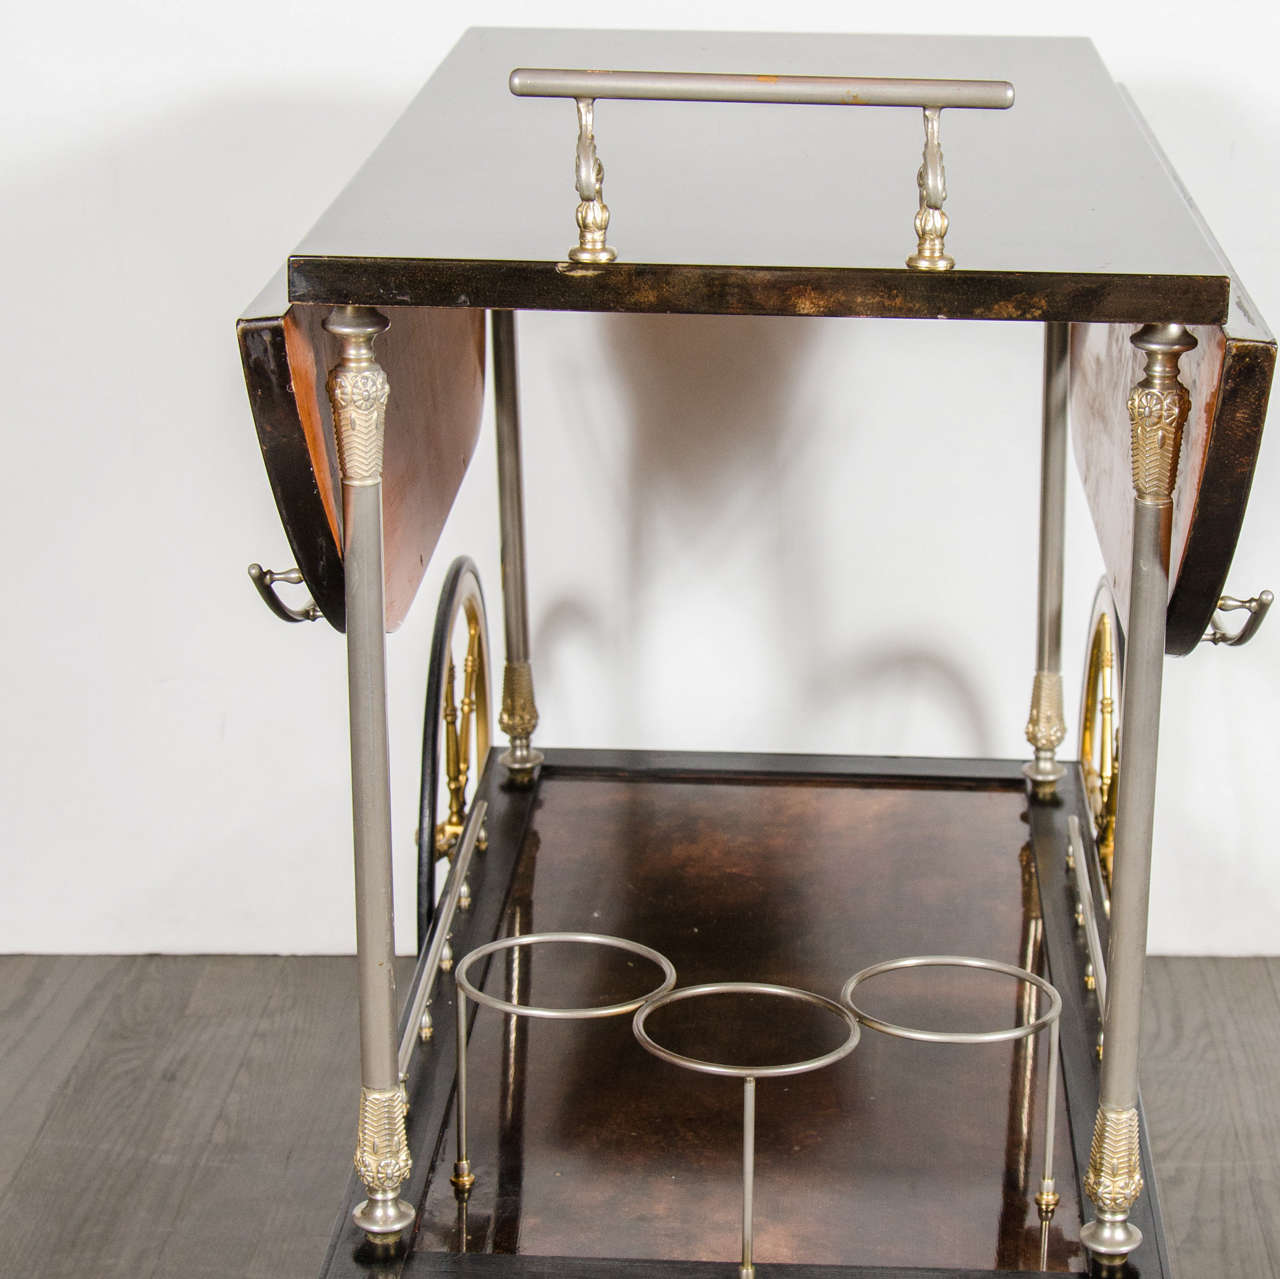 Stunning and luxe lacquered goat skin bar or serving cart by Aldo Tura.  This cart features two-tiers that are supported by stylized column supports.  The bottom tier has an inset center that has a surround of brass rails and a three bottle holder. 